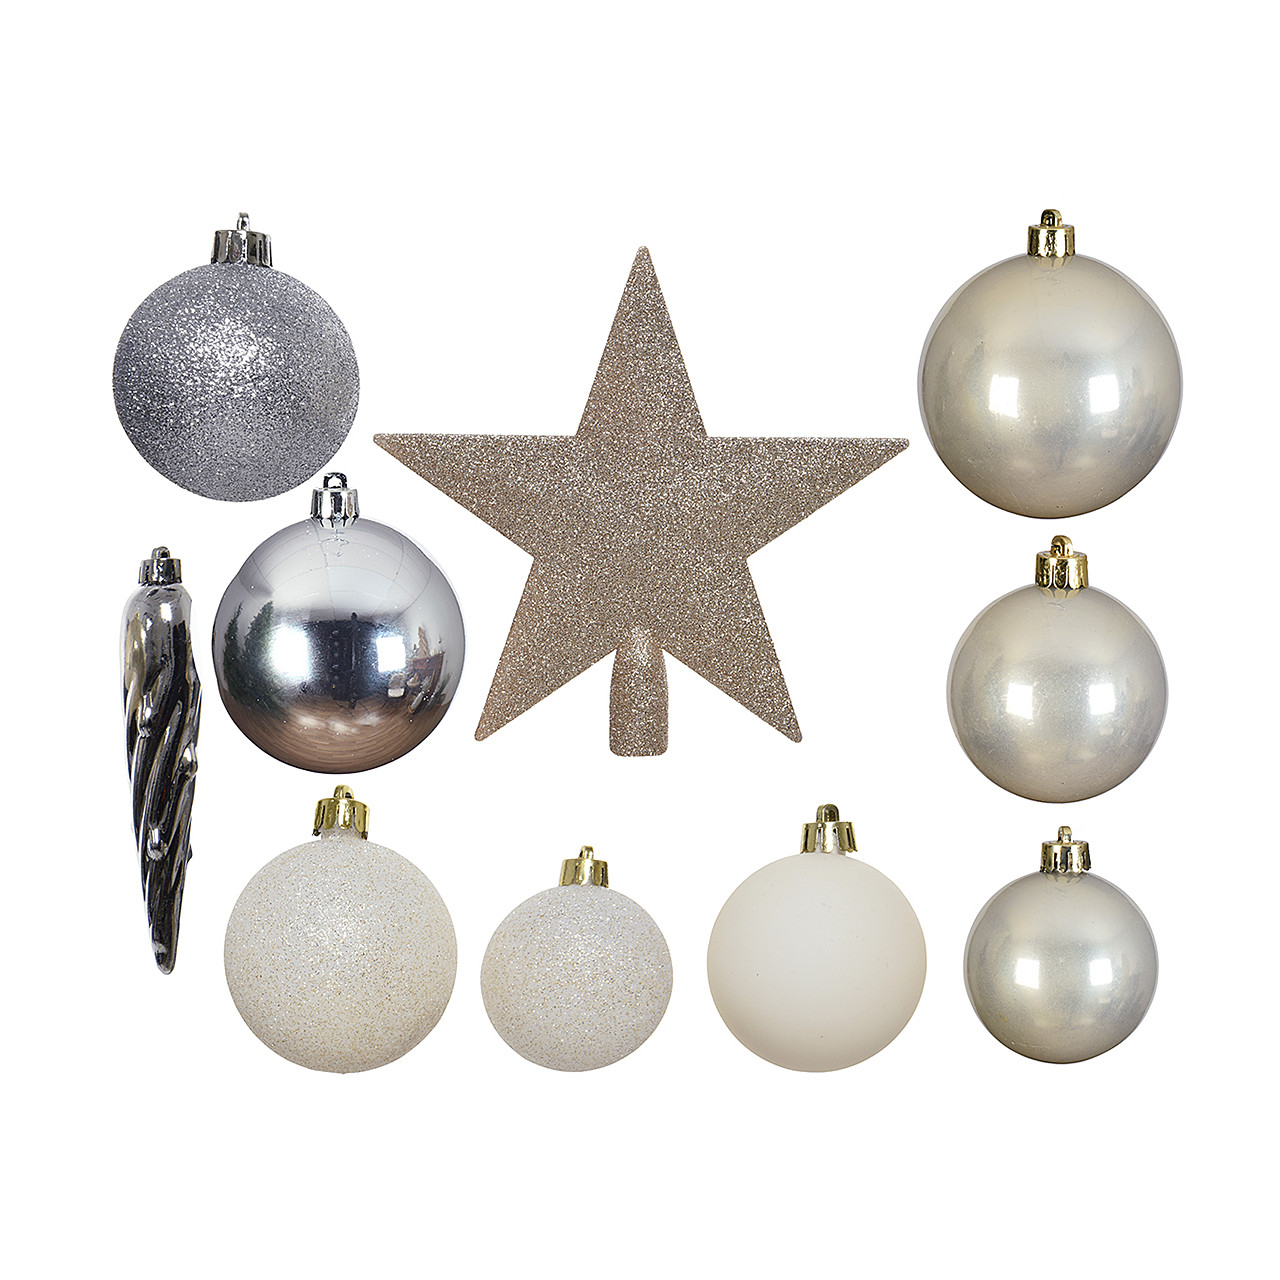 In-Store Only - Assorted Gold, Pearl, and Wool White Shatterproof Christmas Ball Ornaments with Red Star Tree Topper, Set of 33